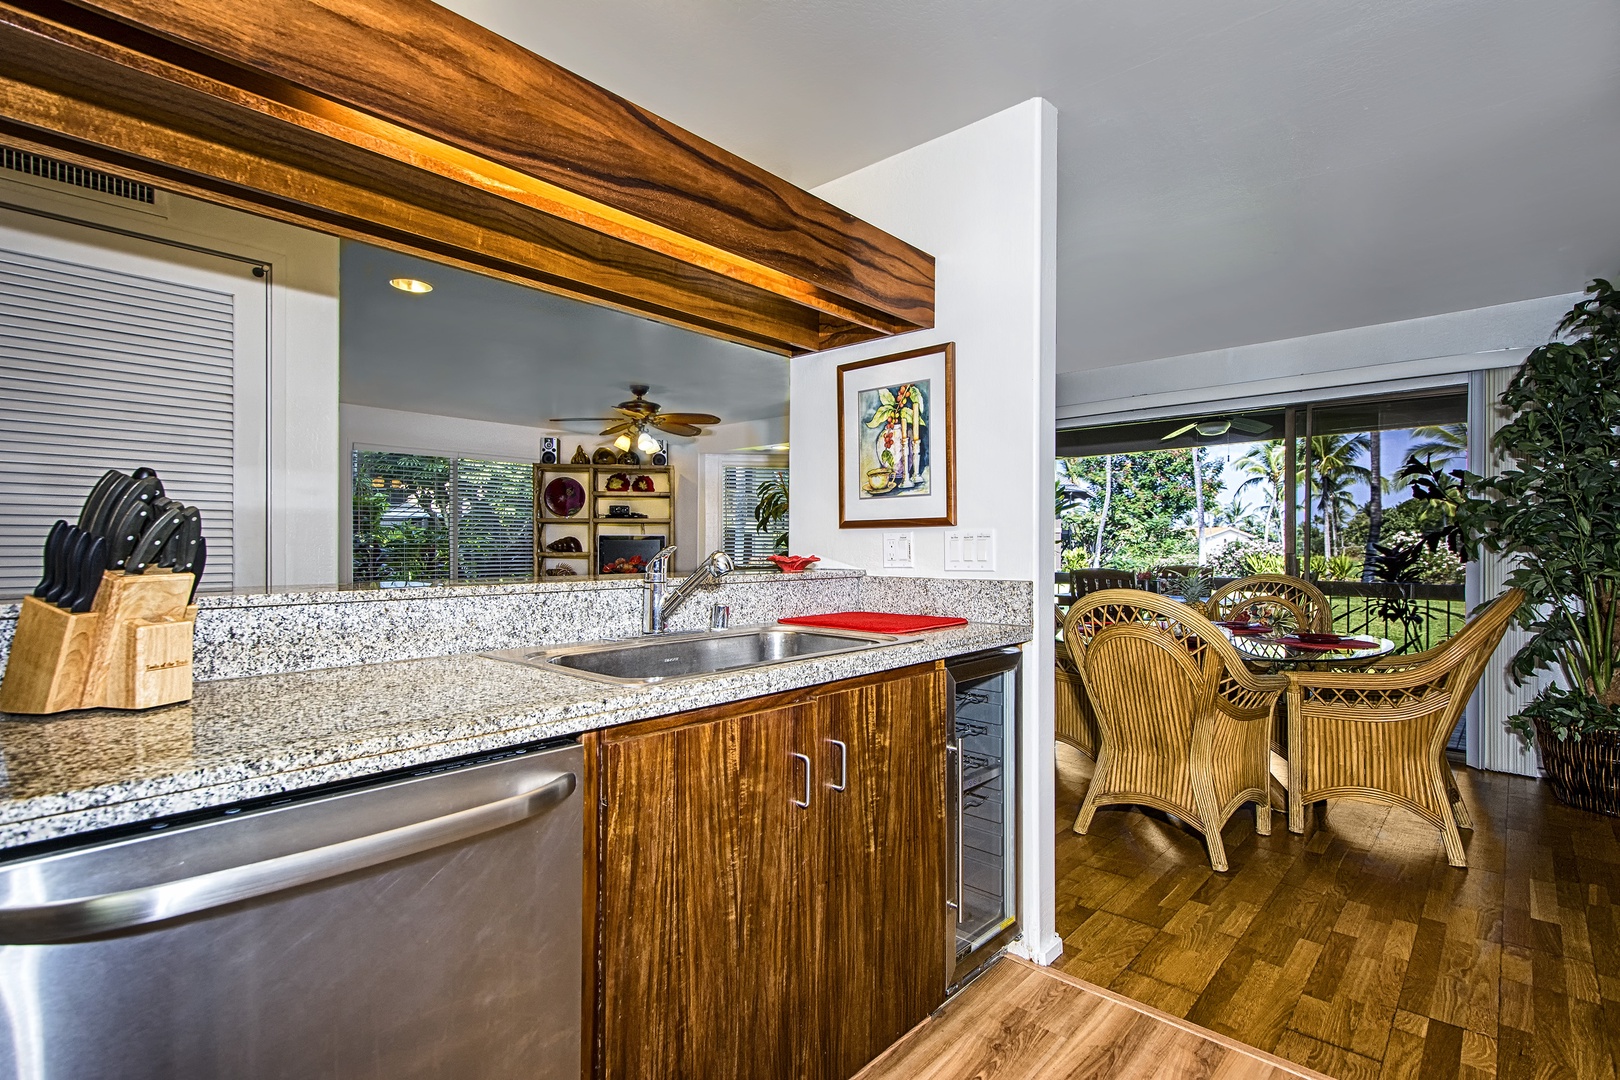 Kailua Kona Vacation Rentals, Kanaloa at Kona 701 - Enjoy cooking a meal in the fully equipped kitchen, which features a breakfast bar with seating for three